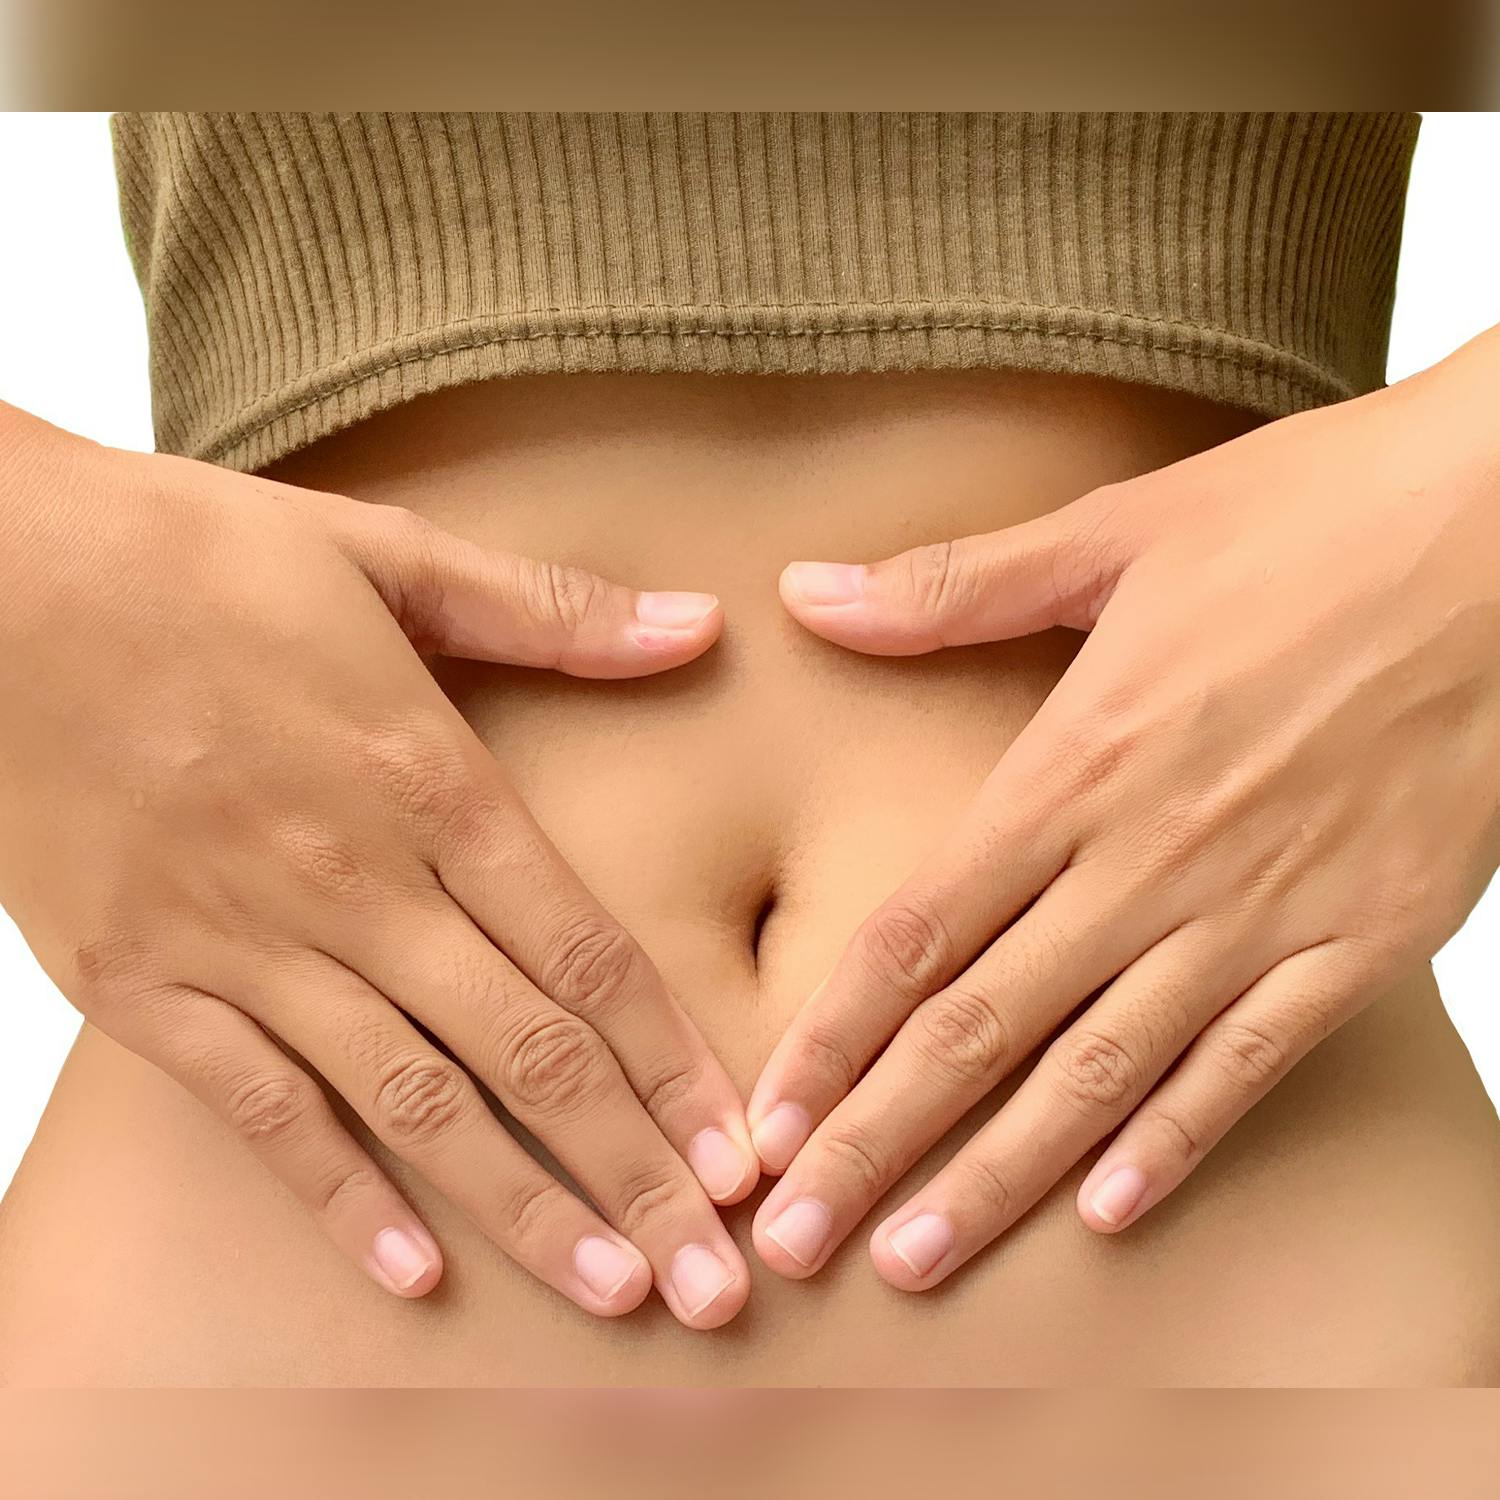 Why you should look after your gut